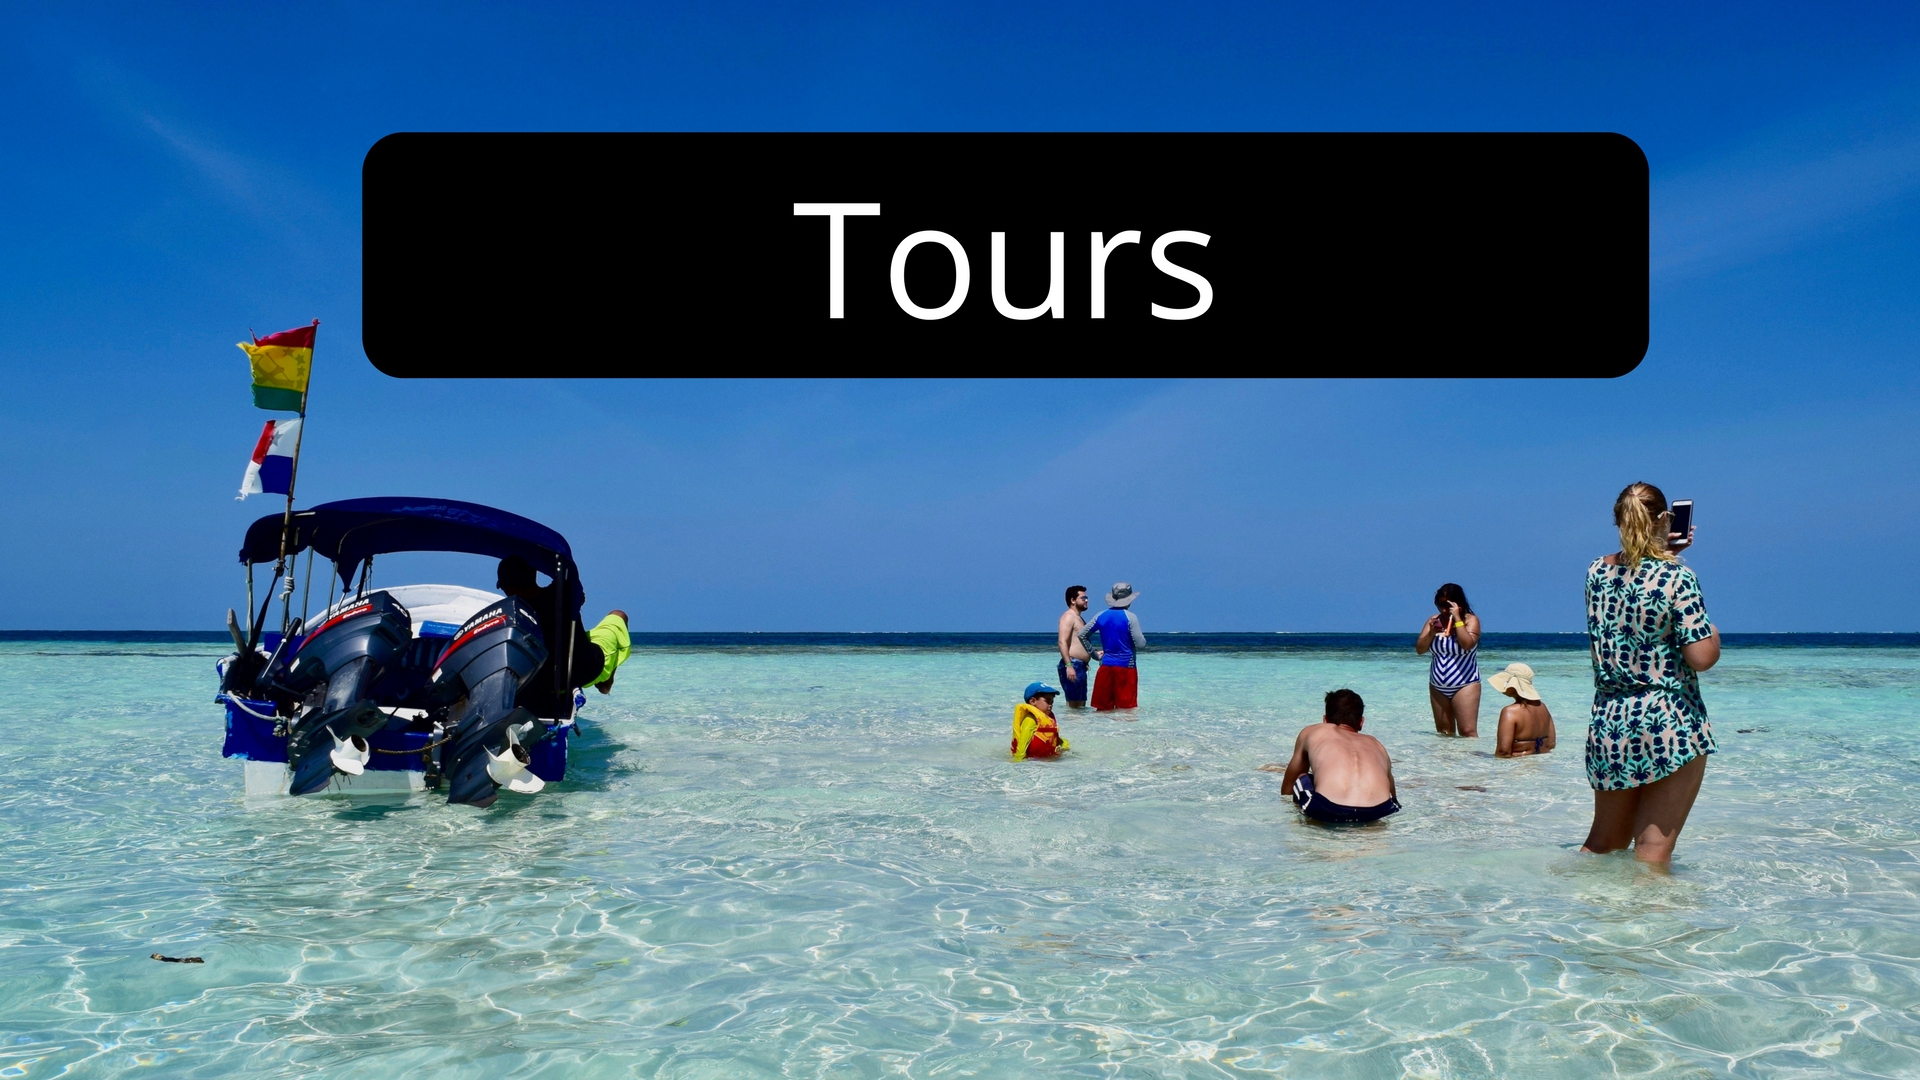 Tours Work with Travel Bloggers